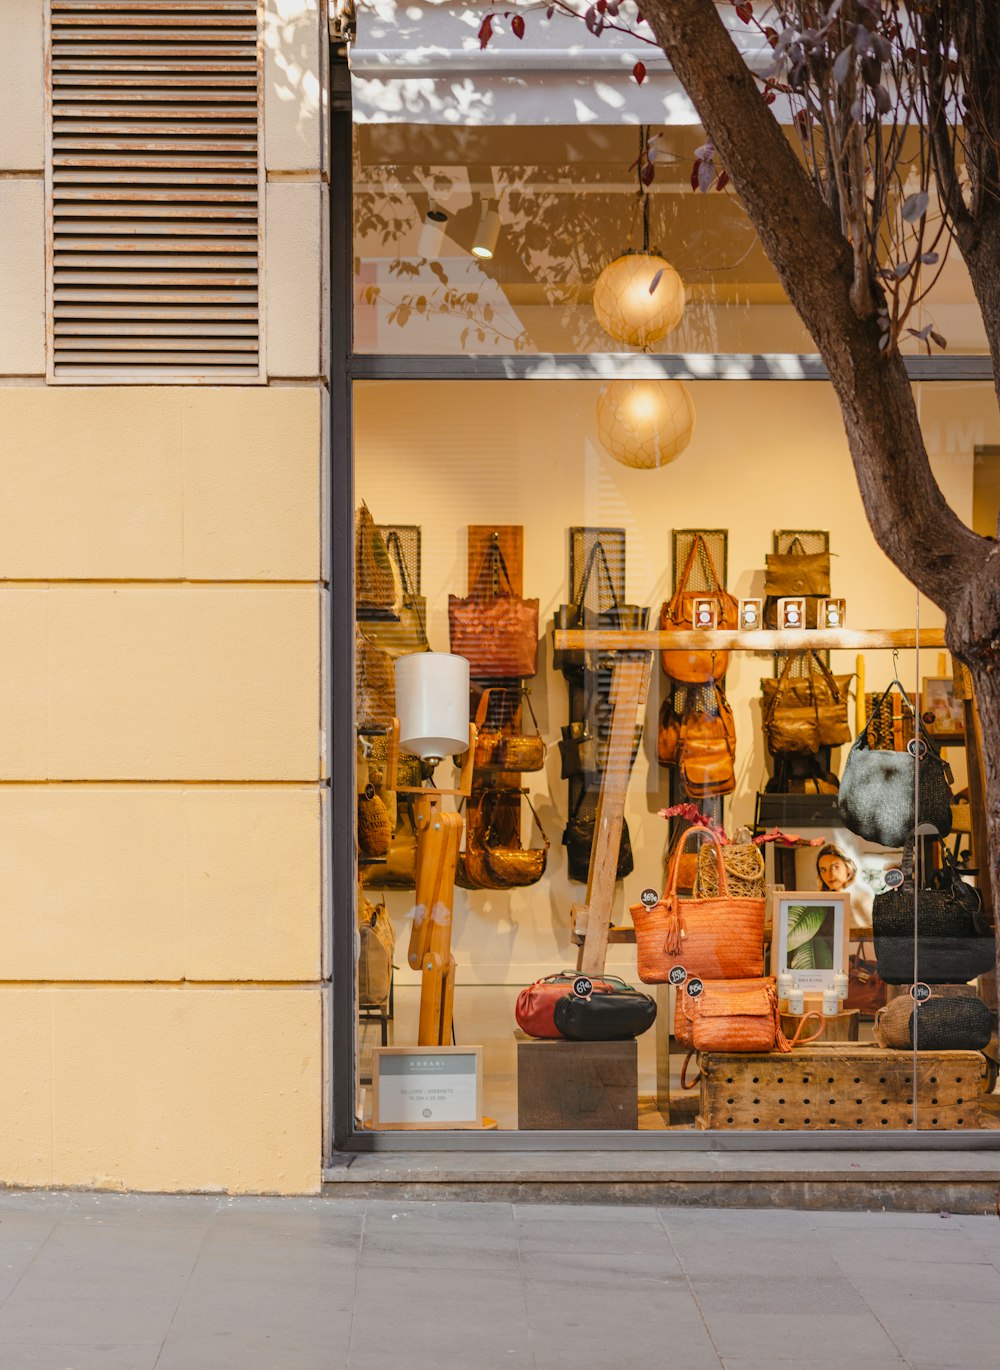 a store front with a display of handbags in the window